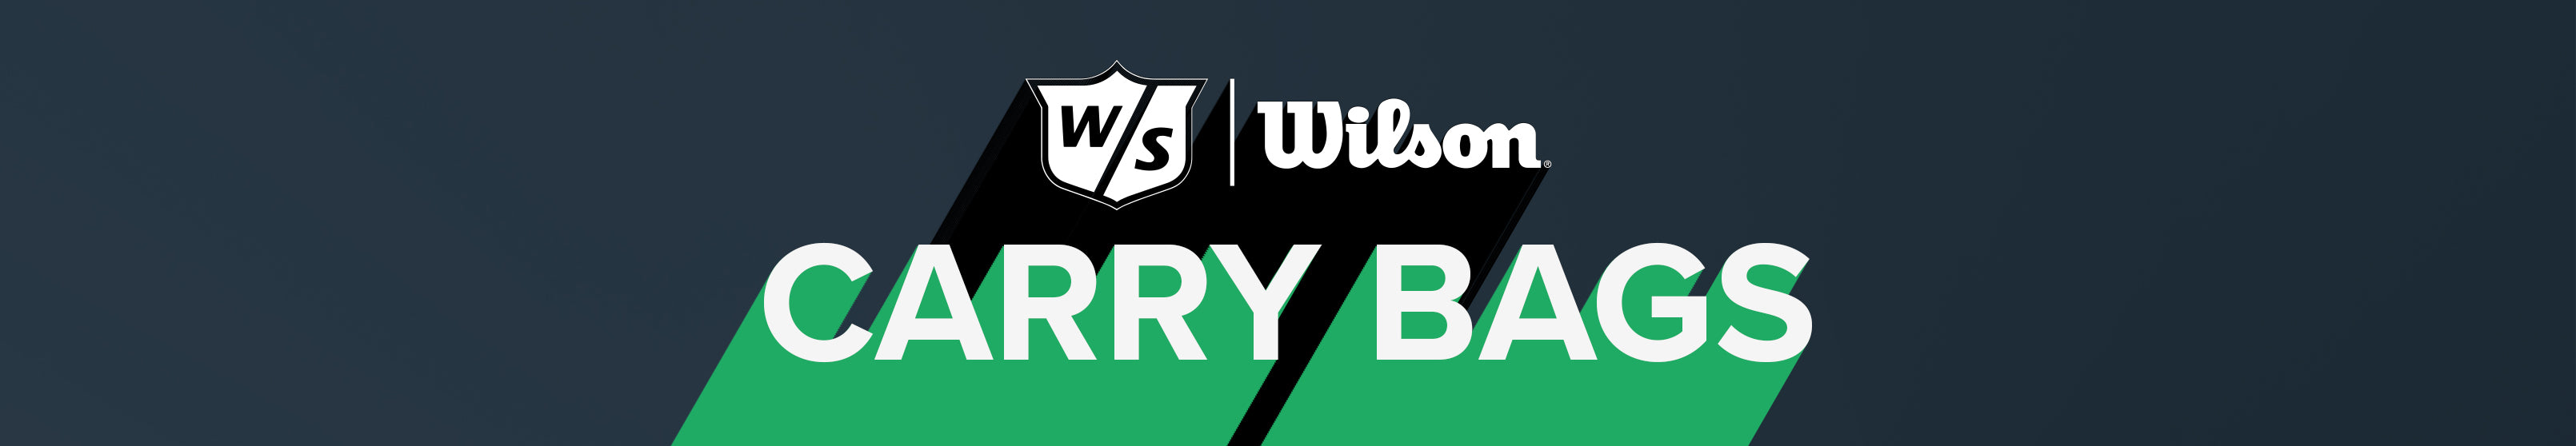 Wilson Carry Bags